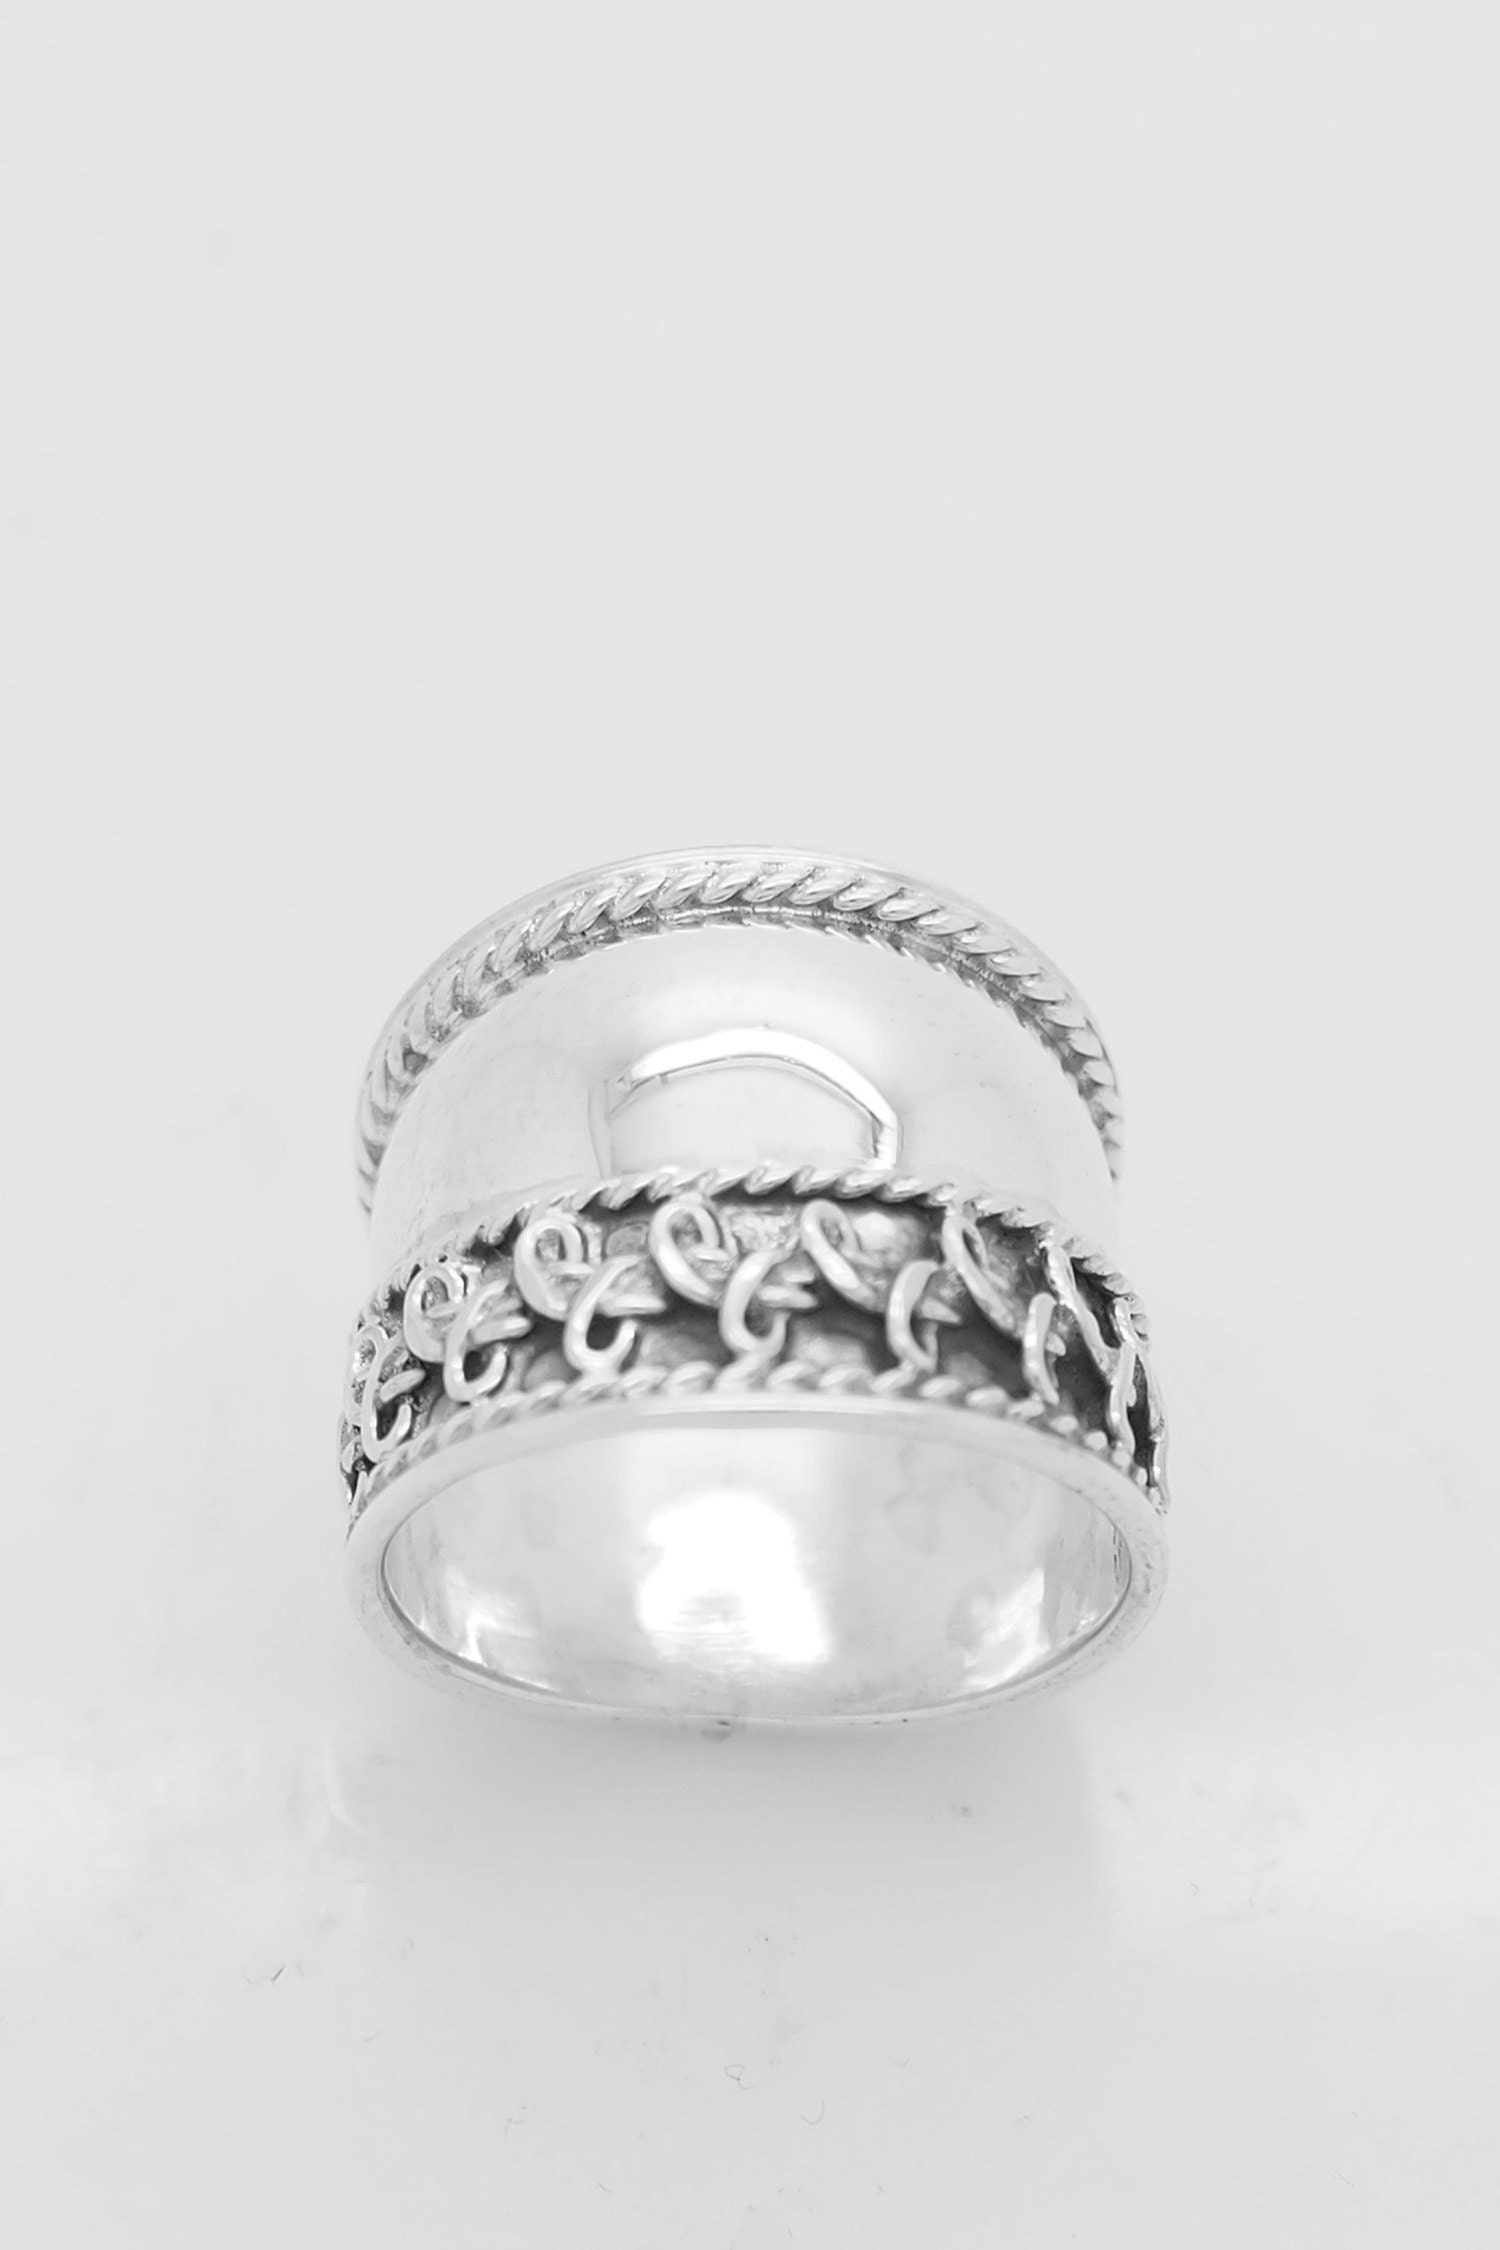 Details about   New Real Solid 925 Sterling Silver Large Dome Cluster Design Cocktail Ring 